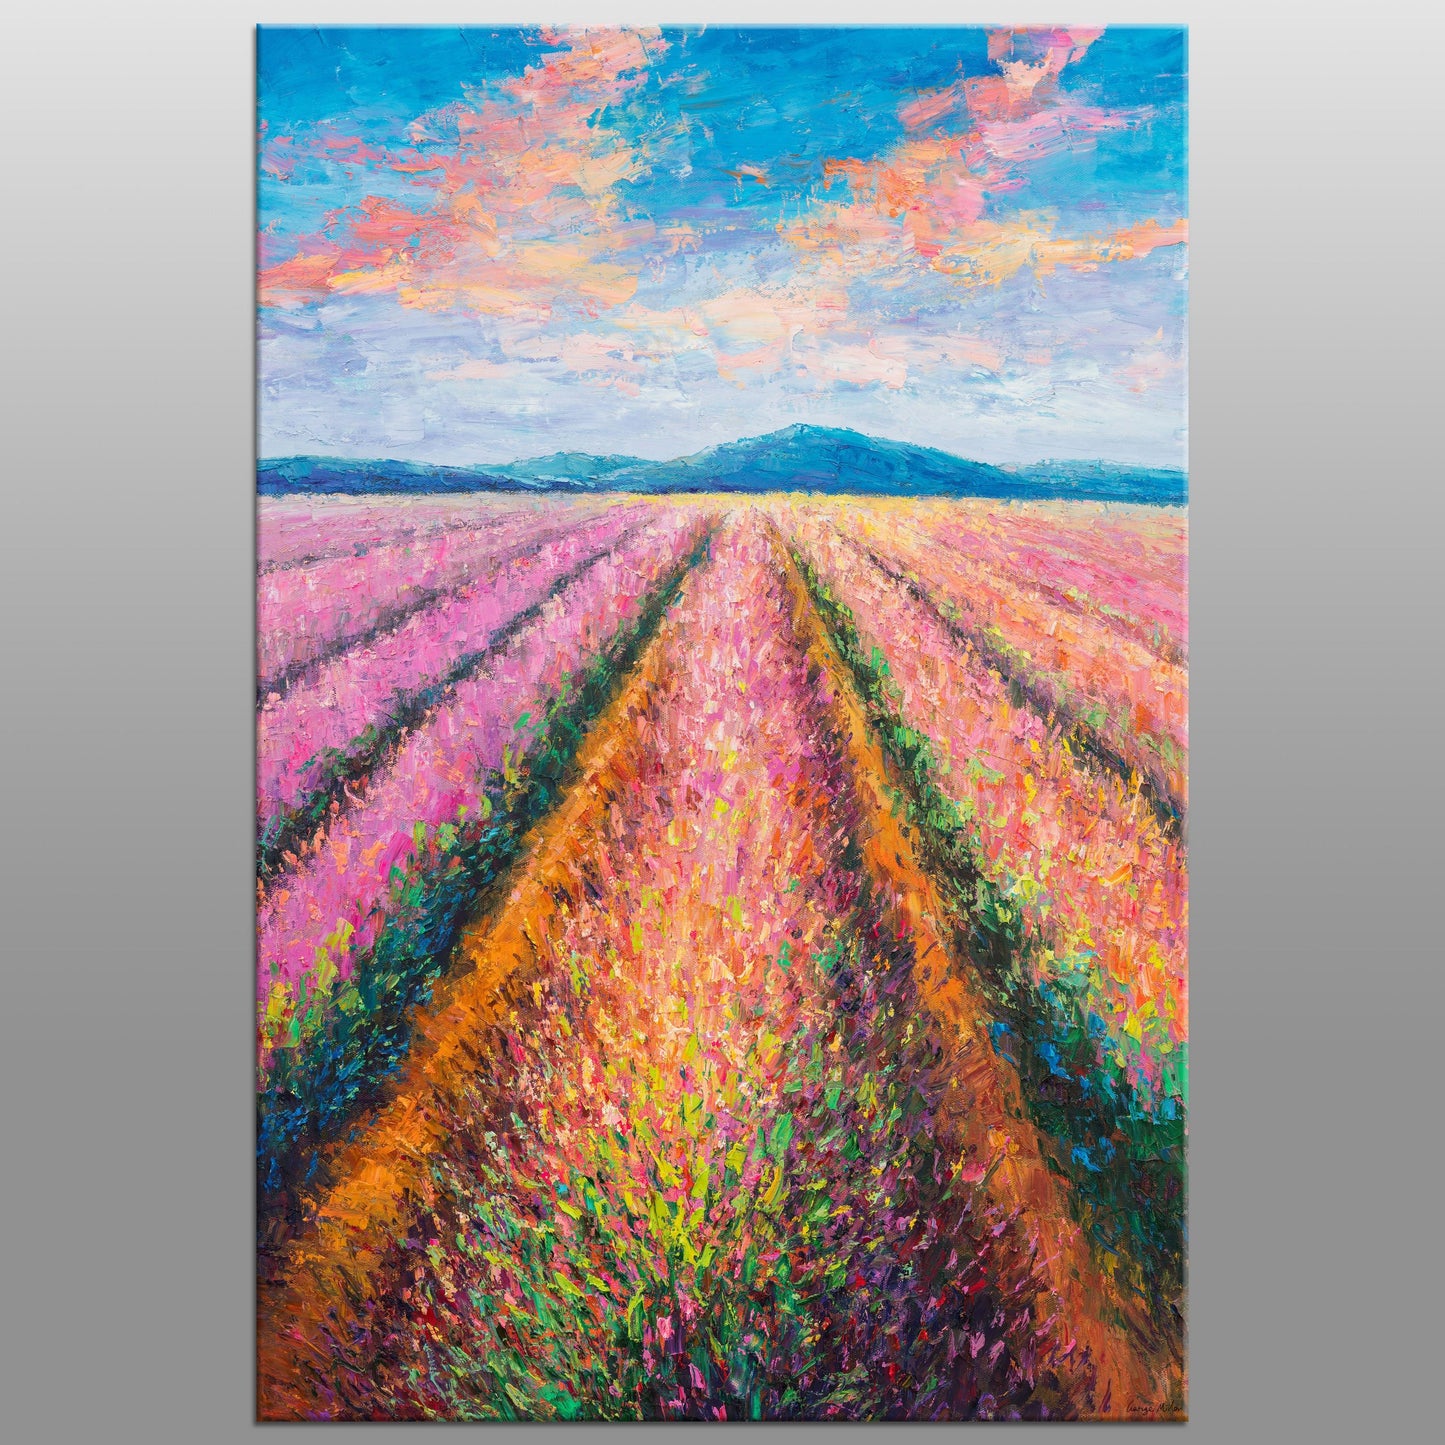 Oil Painting, Large Canvas Art, Large Landscape Painting, Contemporary Art, Rustic Wall Decor, Canvas Art, French Provence Lavender Field